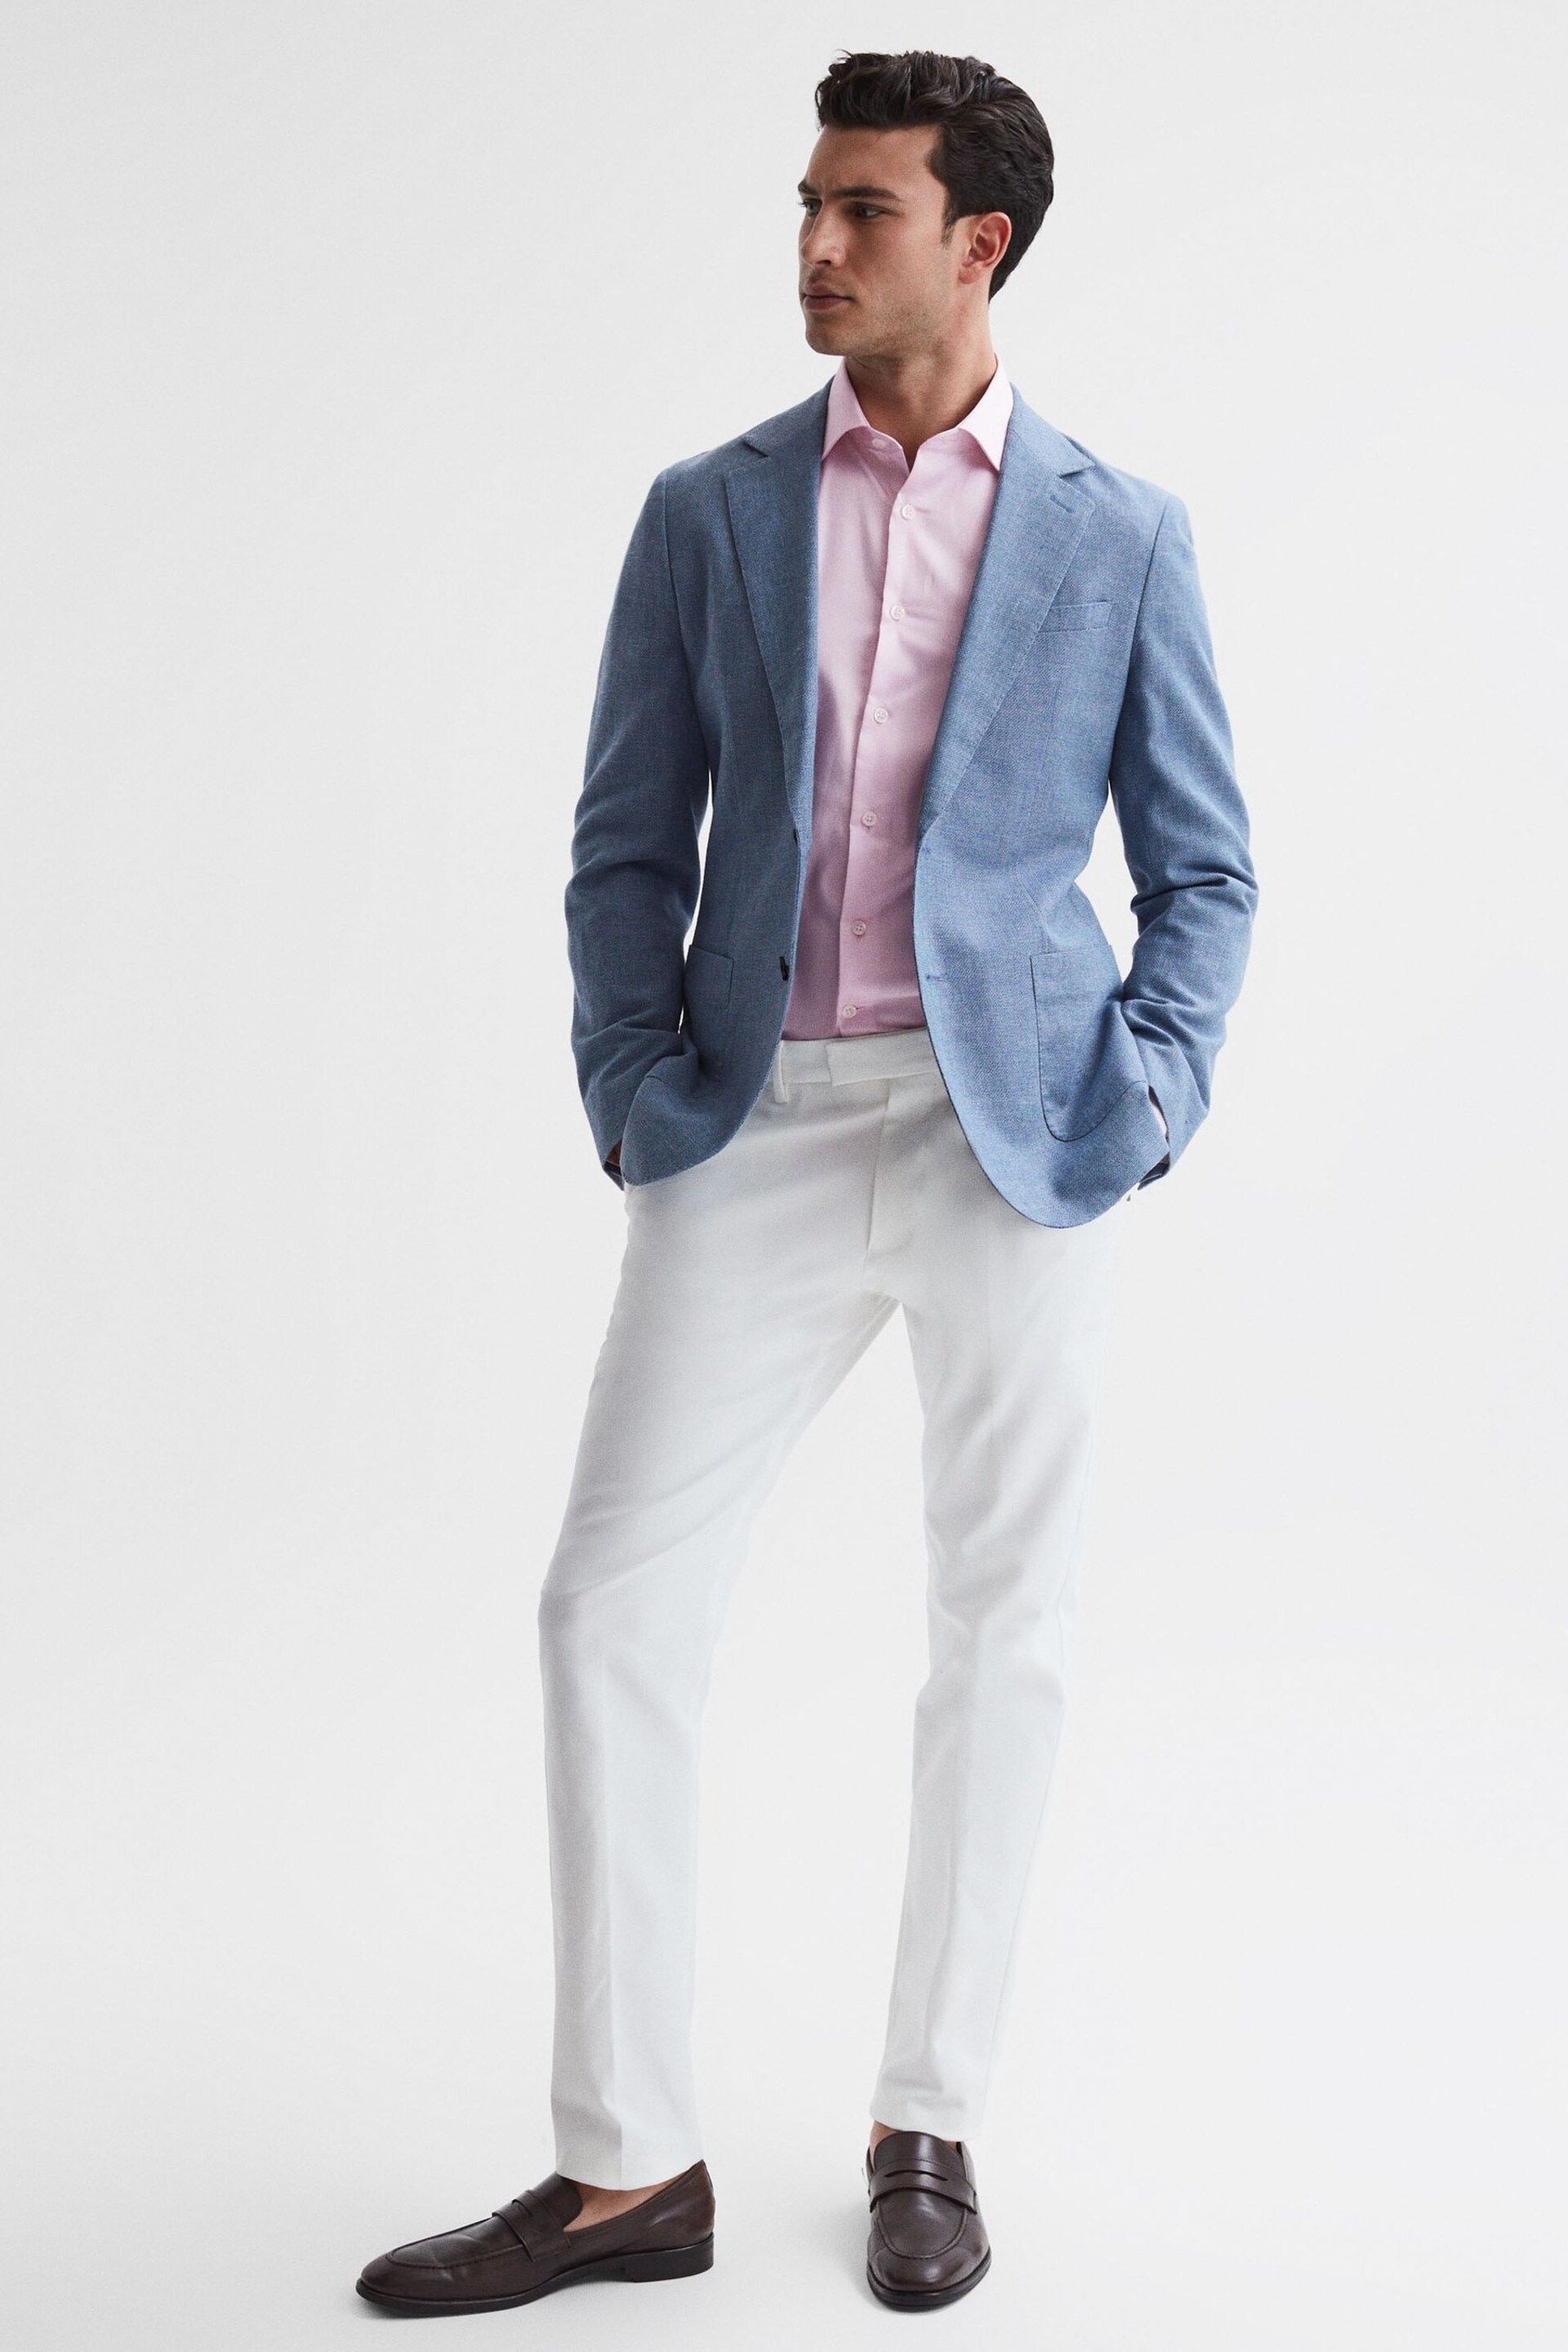 Reiss Pink Remote Cotton Satin Slim Fit Shirt - Image 6 of 6